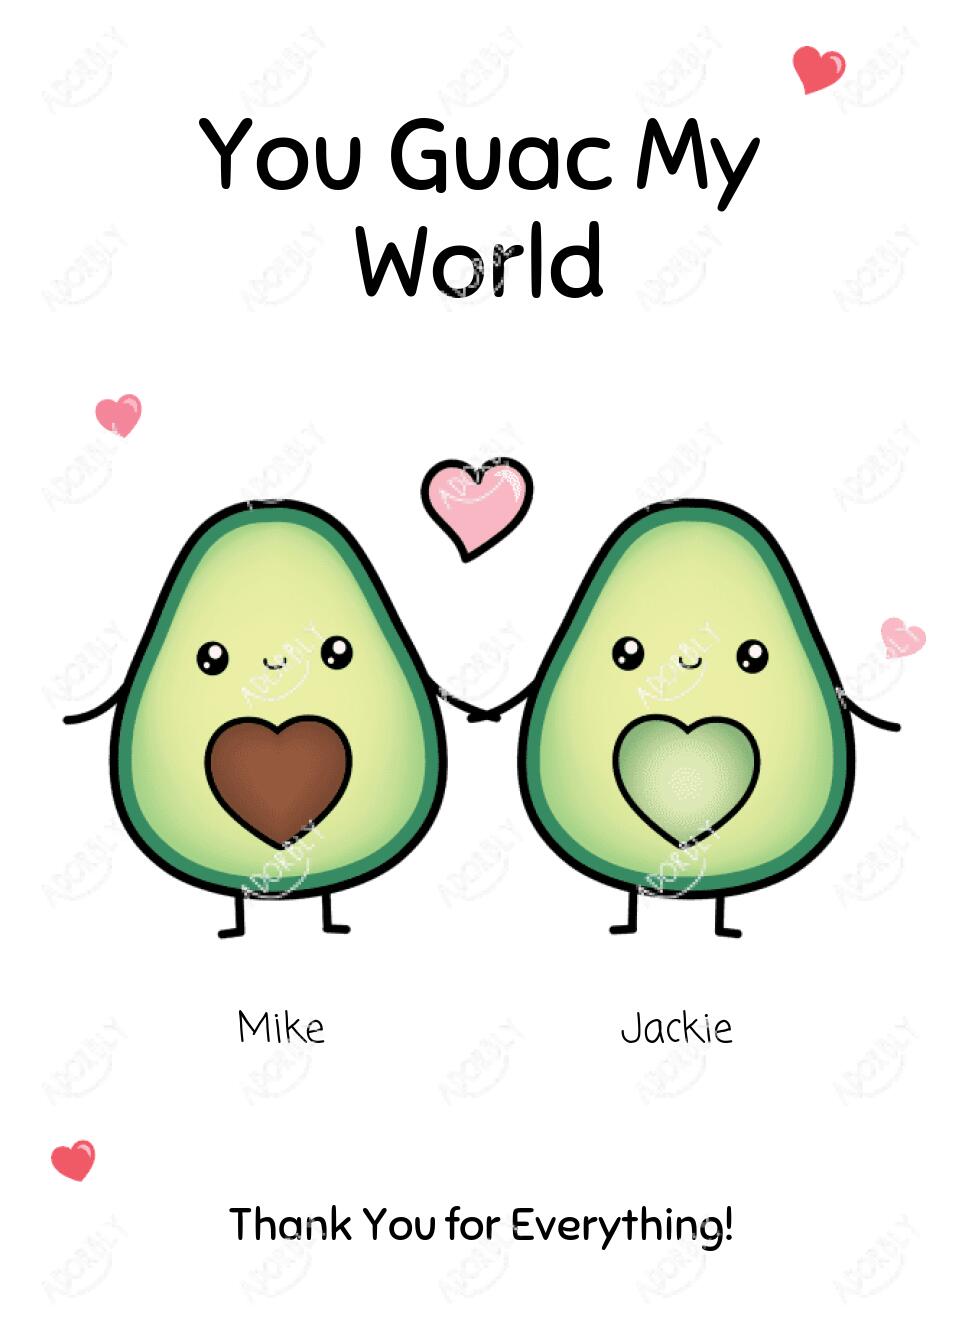 You Guac My World - For All Couples - Personalized Card